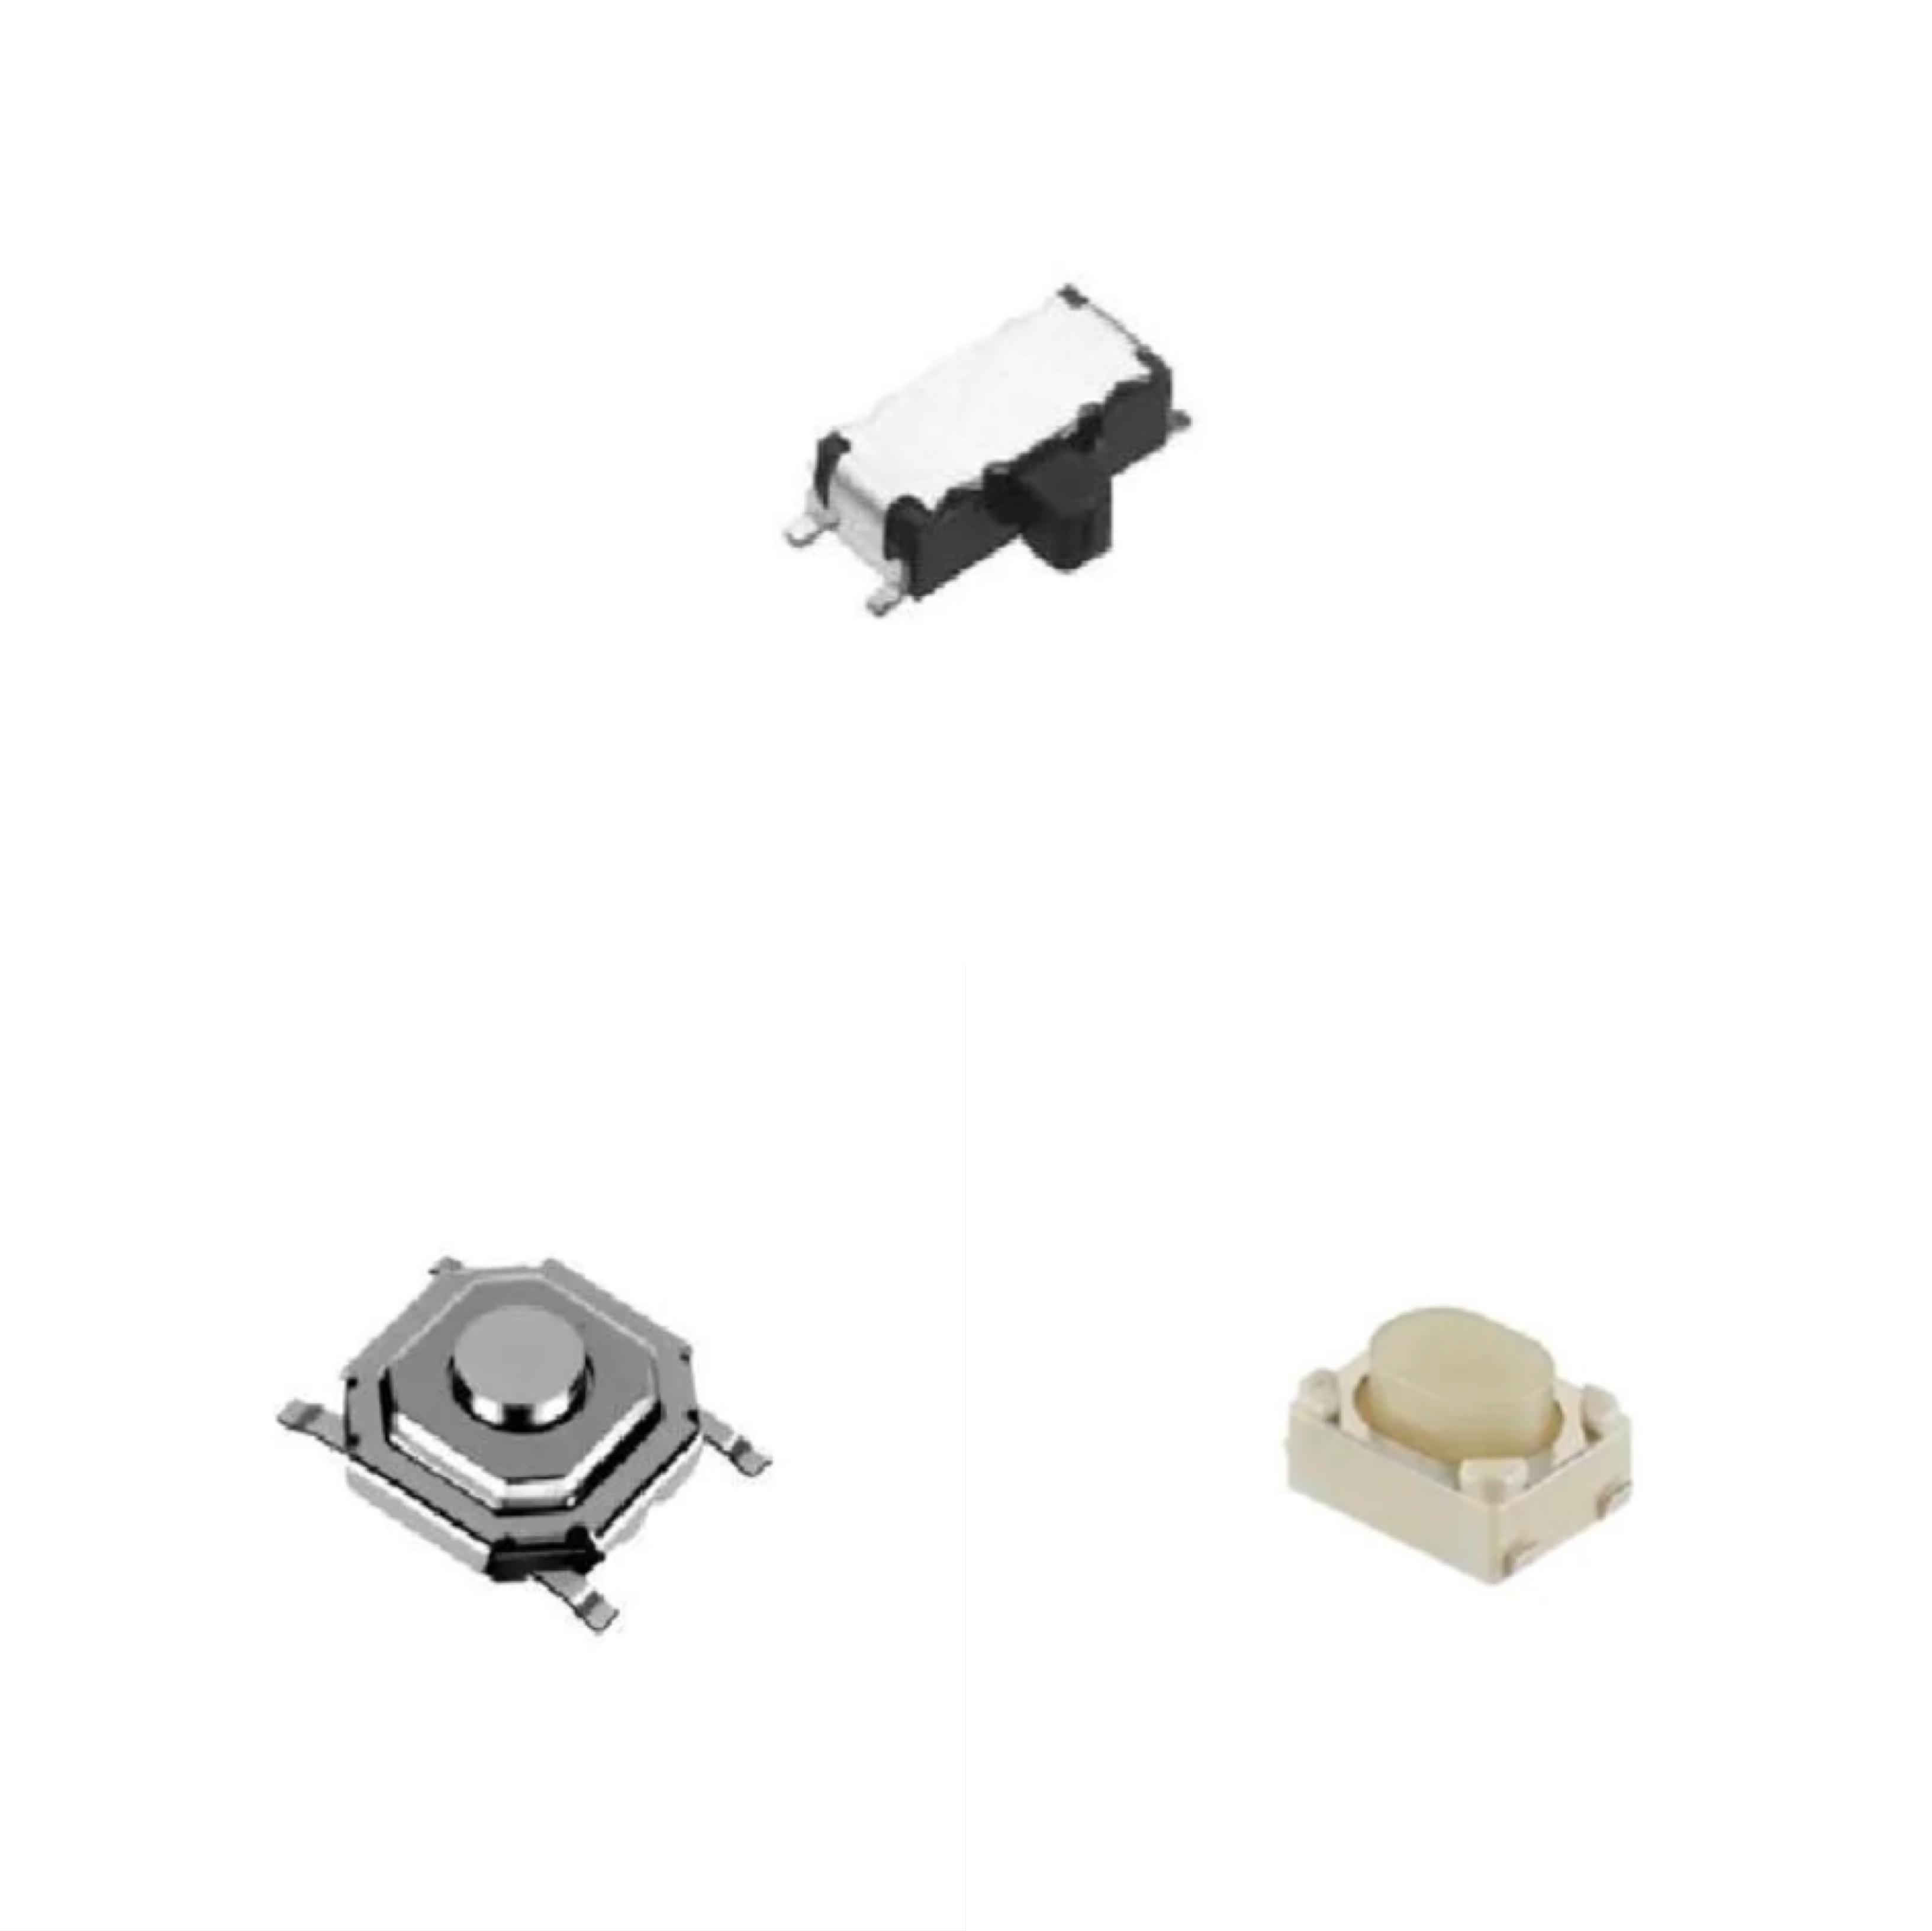 Wholesale Price China Speakers - SKRTLAE010 4.50mm x 3.40mm SPST 50mA 12VDC Side operation Round Button SMD Tactile Switches RoHS – Ronghua